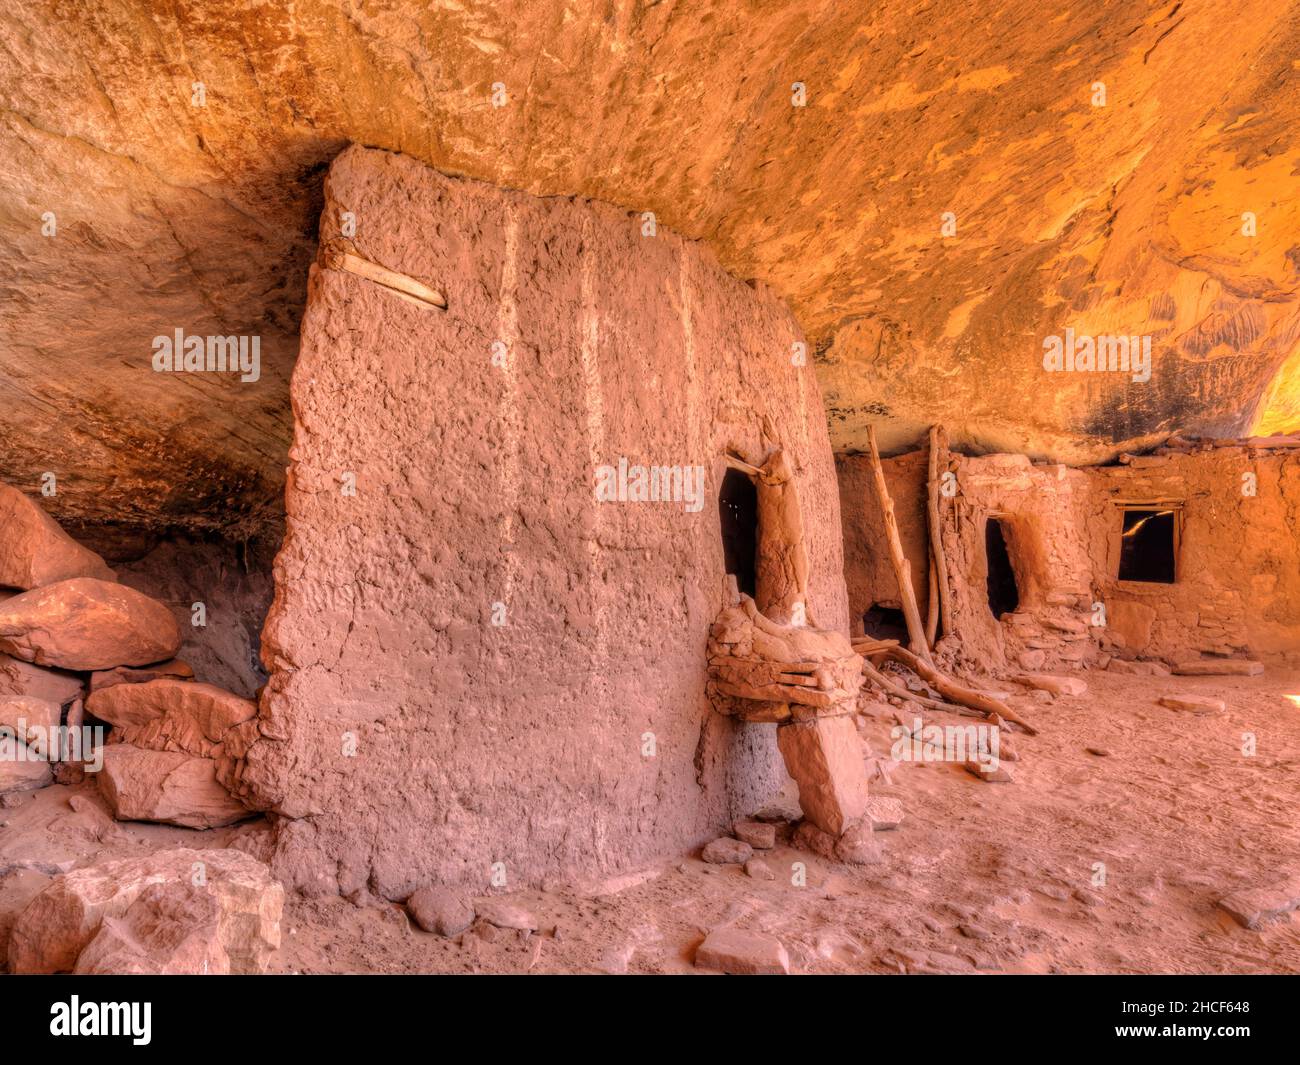 Cliff dwelling room walls made of wattle and daub construction techniques in the Moon House in McCloyd Canyon, Bears Ears National Monument. Stock Photo